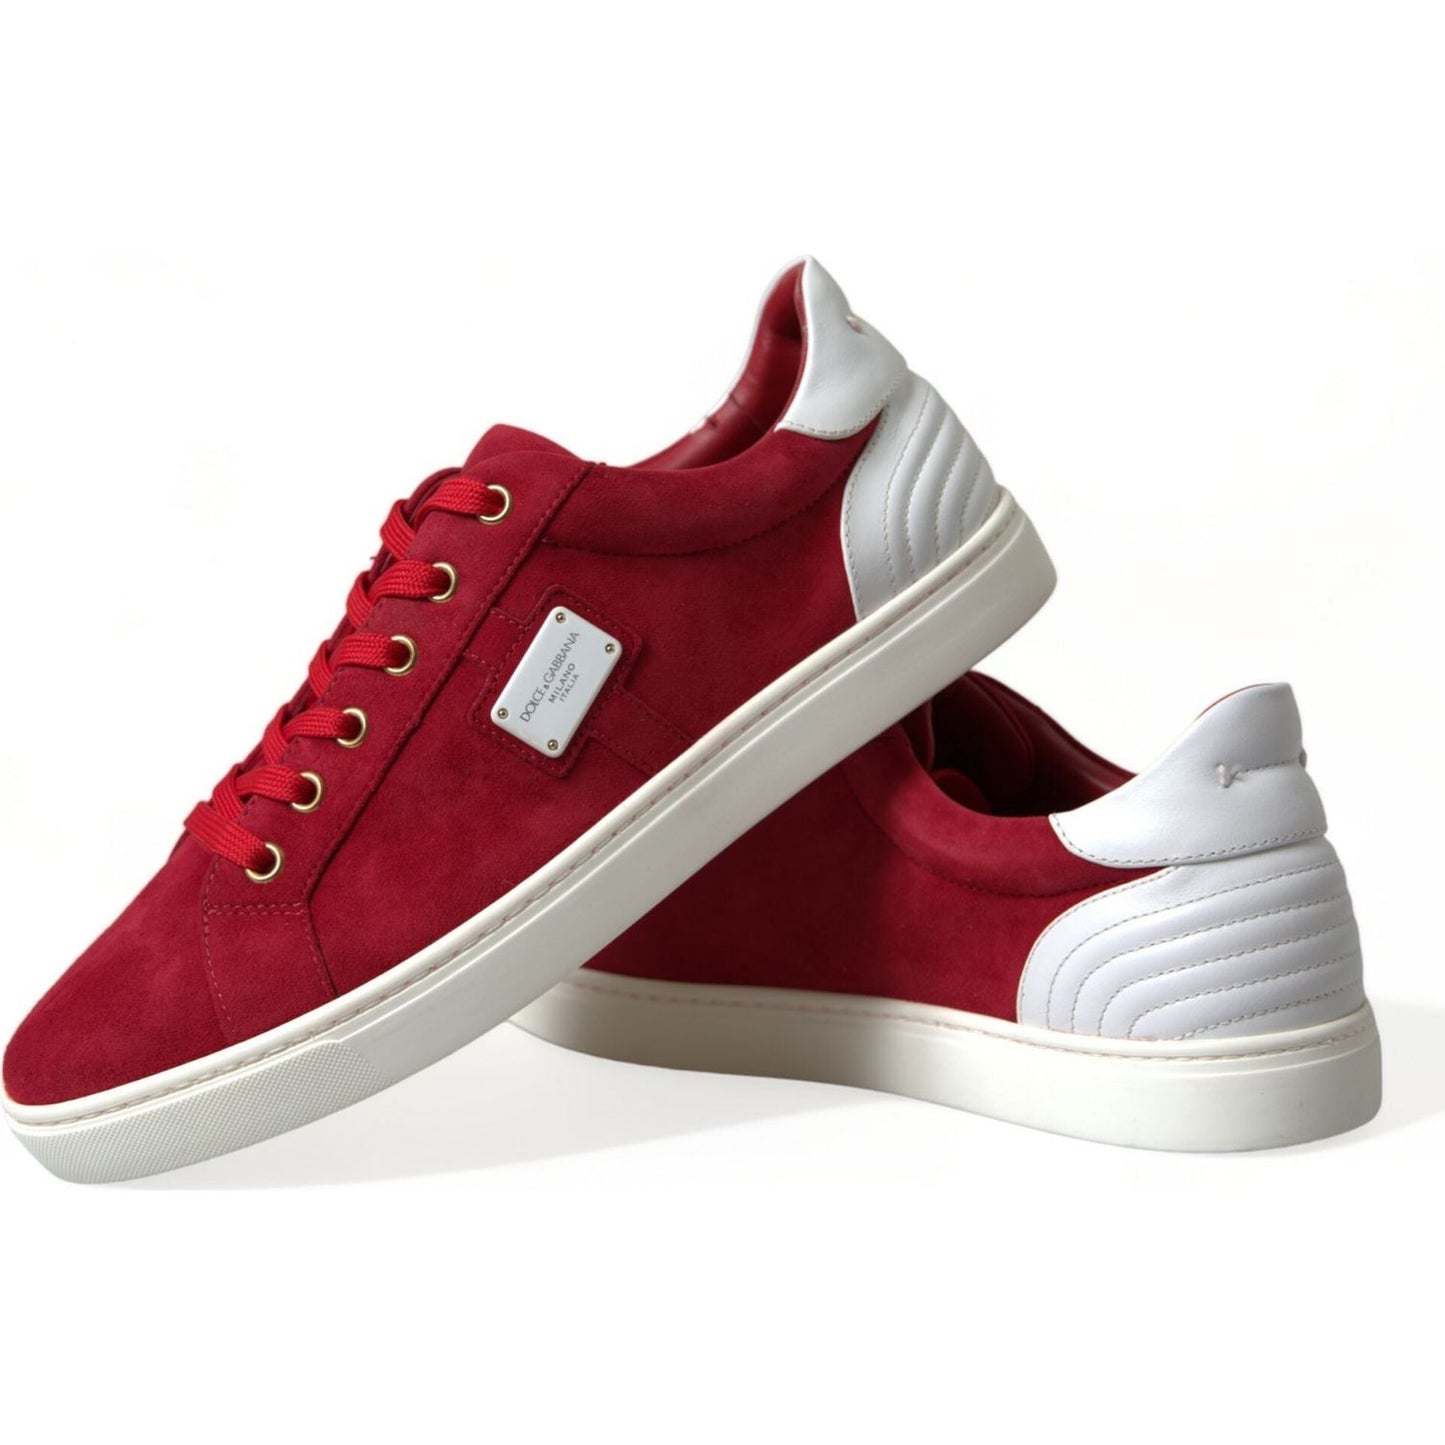 Dolce & Gabbana Elegant Red & White Leather Sneakers red-suede-leather-low-top-sneakers-shoes